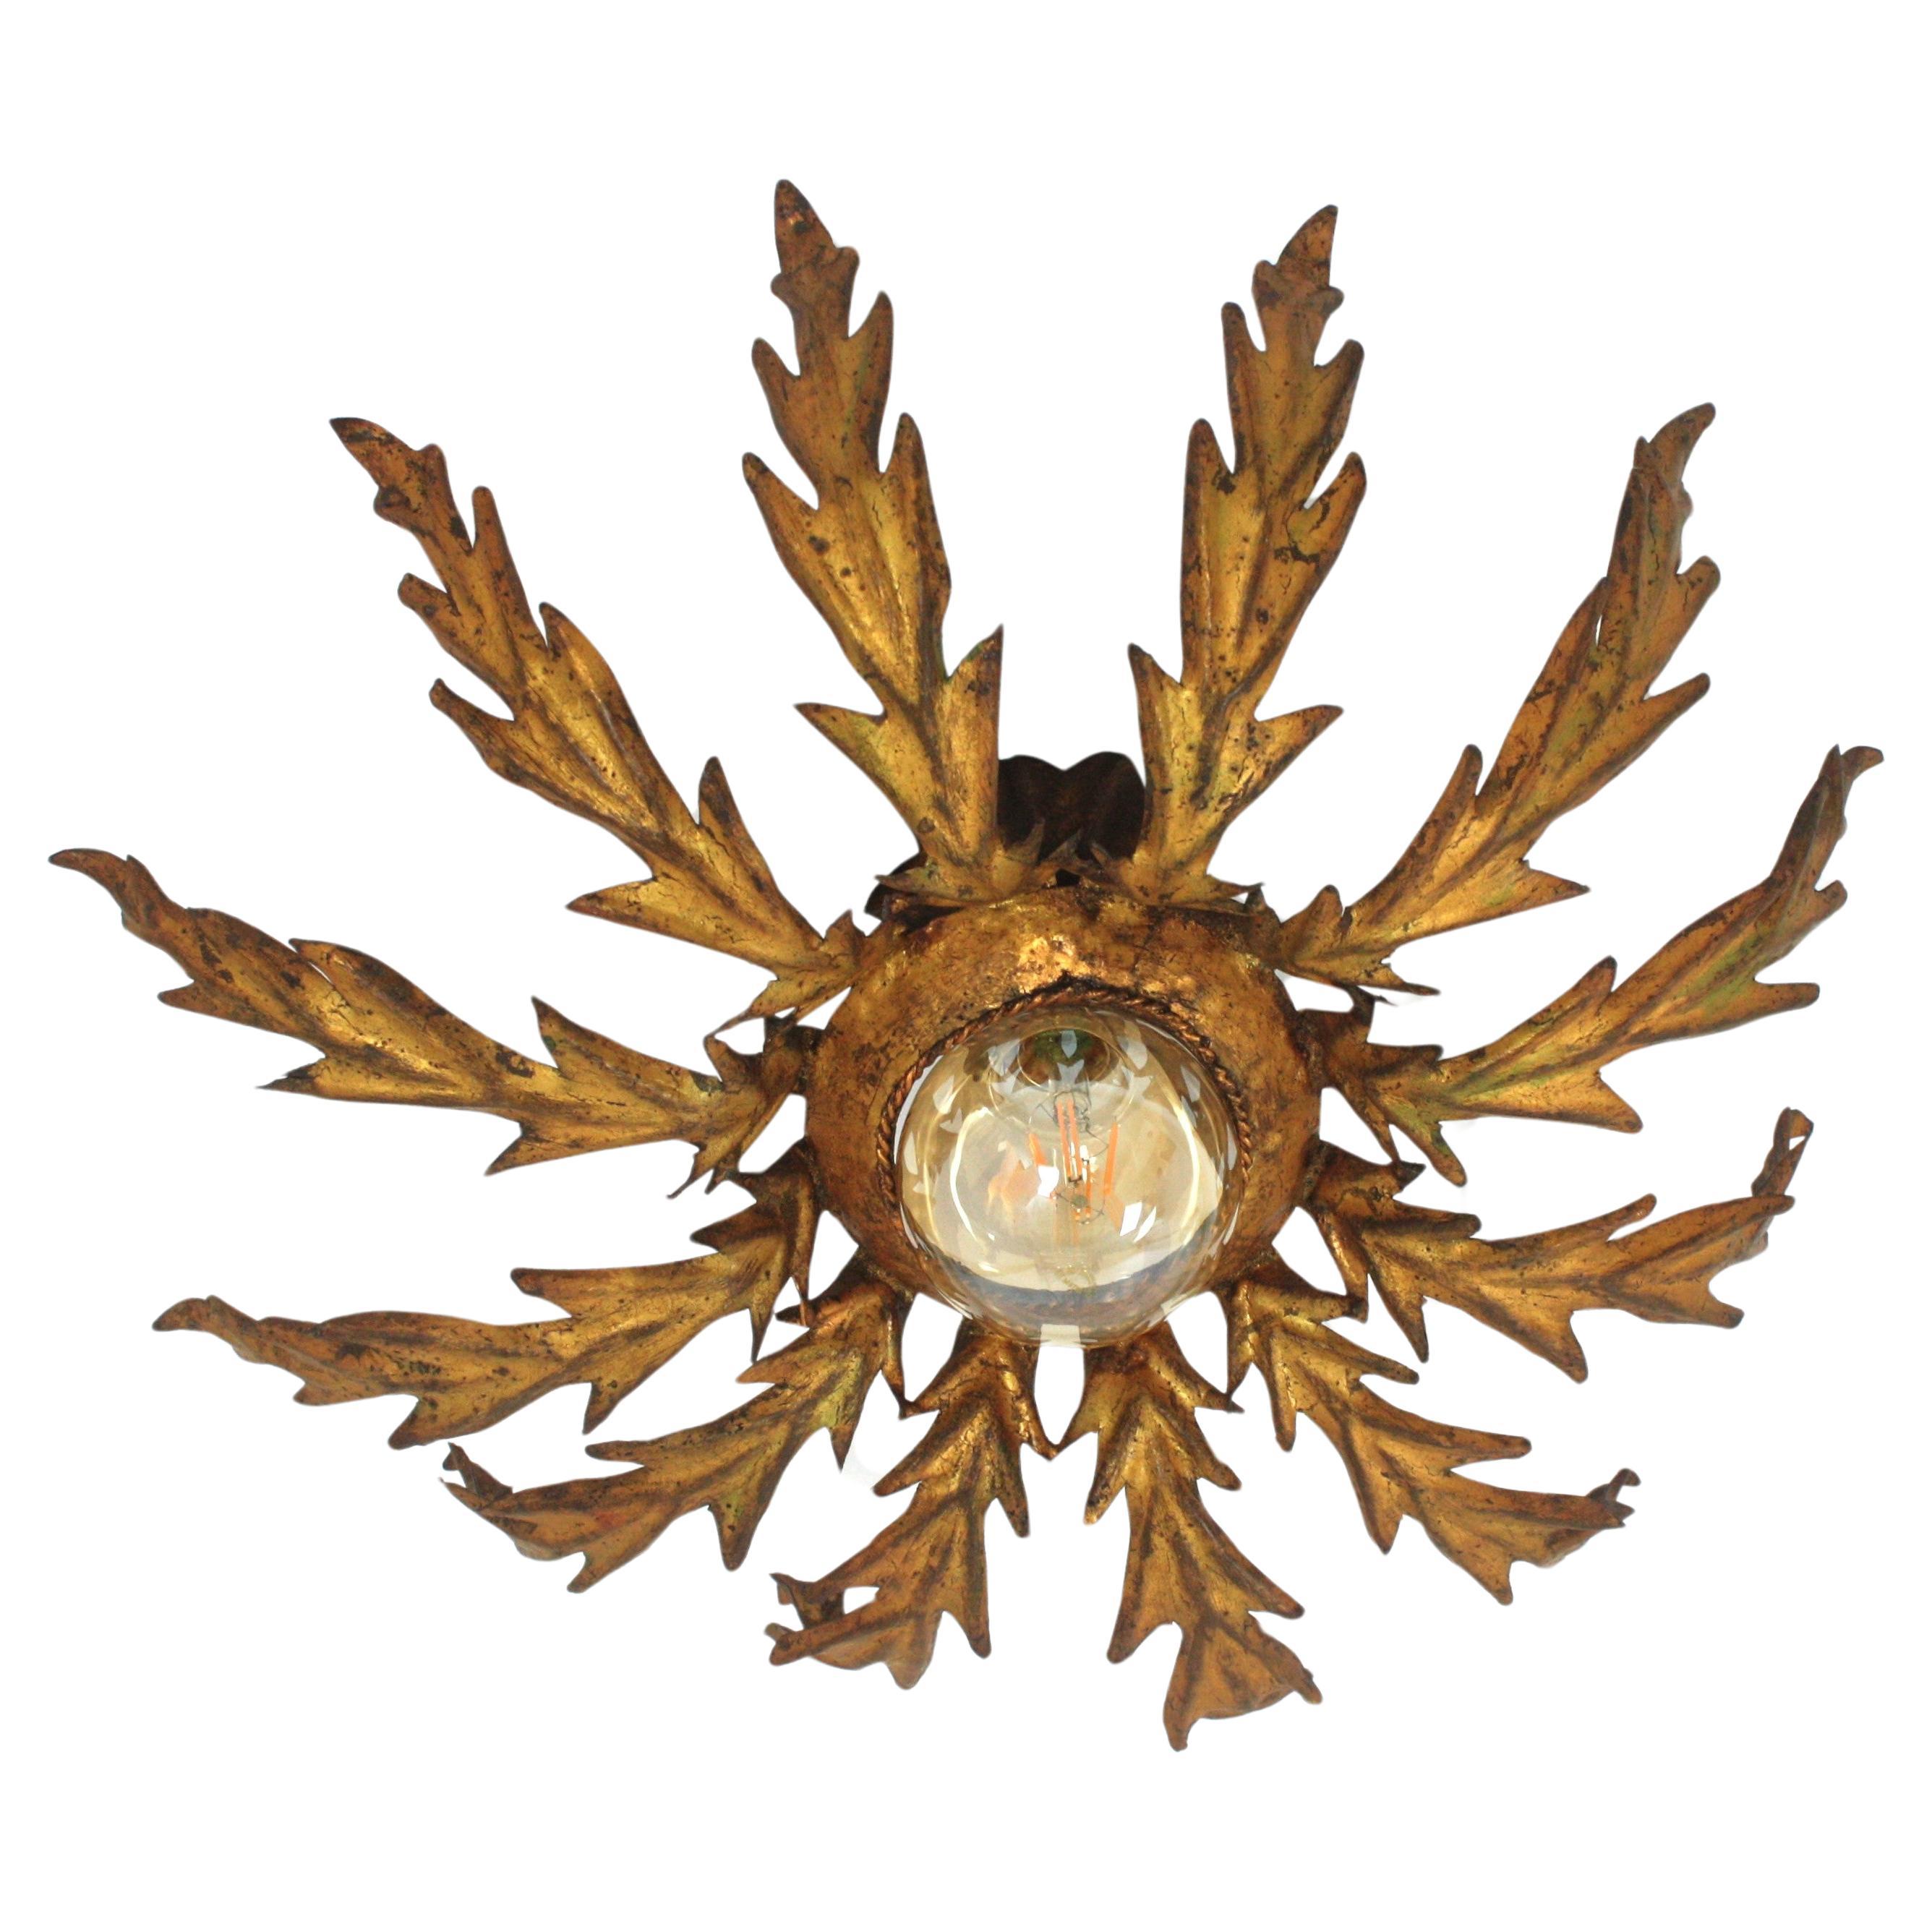 Sunburst Flower Foliage Flush mount in Gilt Iron. France, 1940s.
Eye-catching iron leafed sunburst light fixture with a layer of hand cut iron leaves surrounding a central light. It has a terrific patina with gold leaf gilding.
It has a design